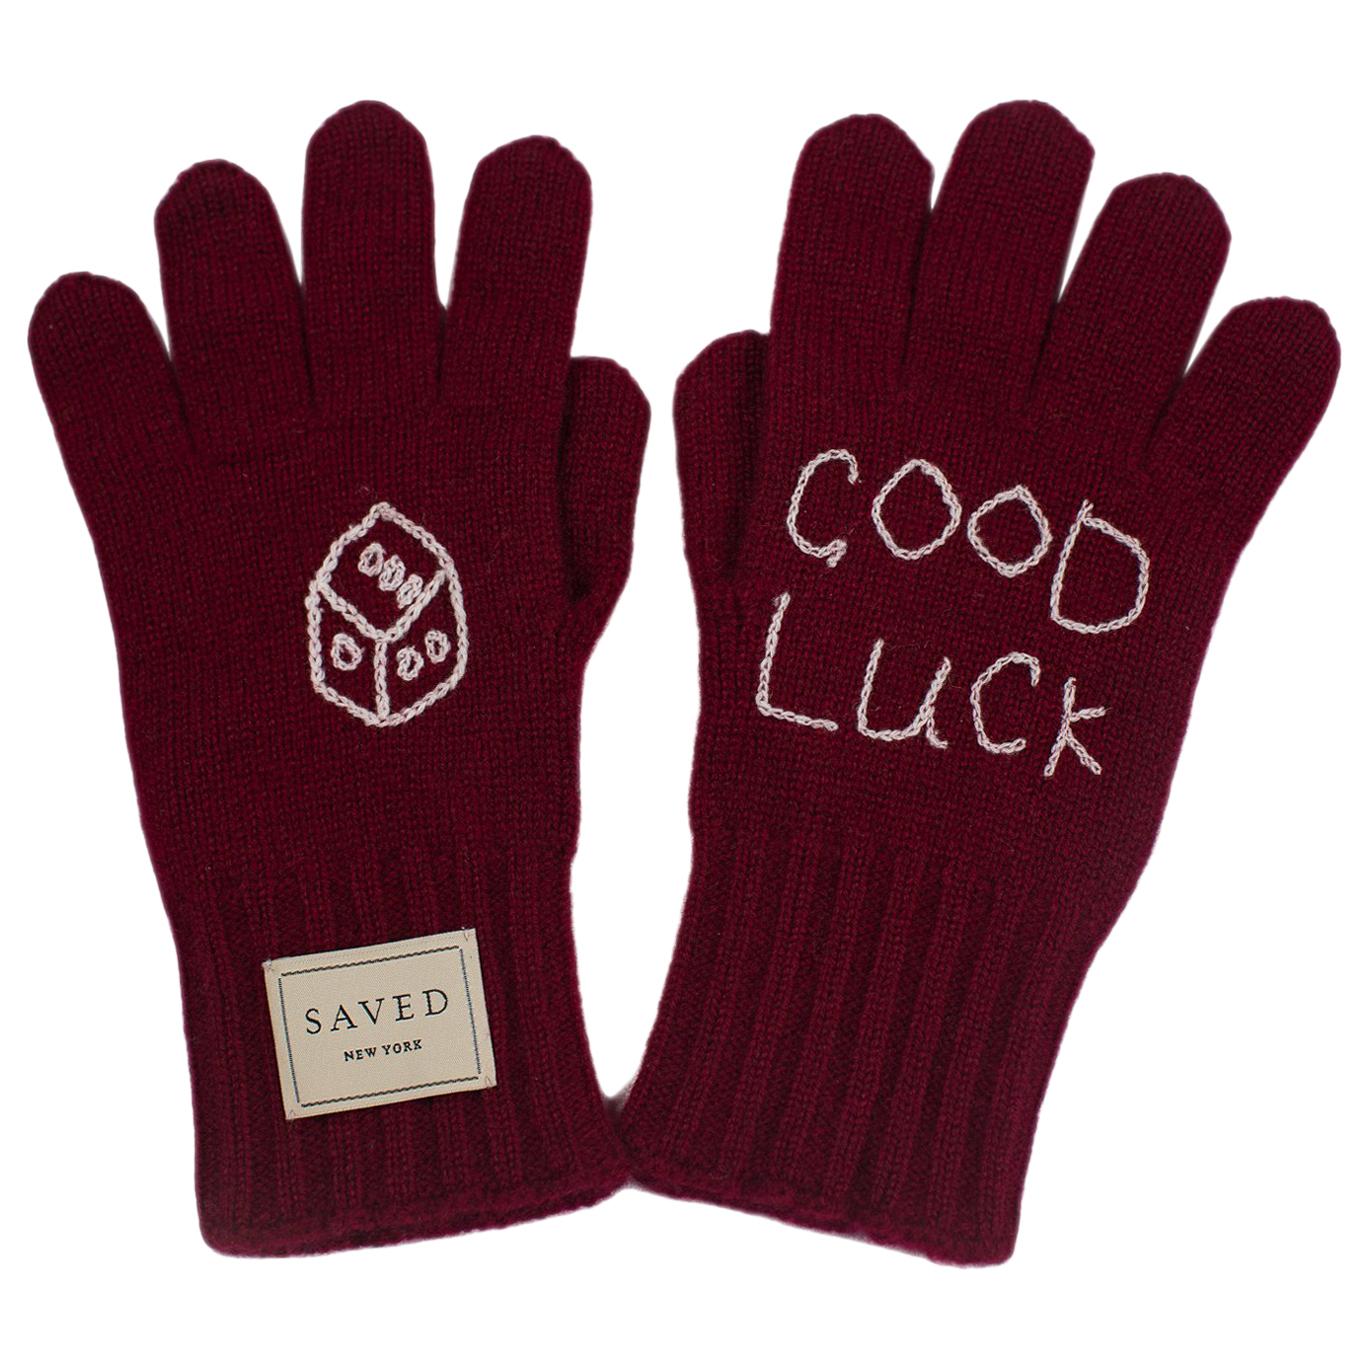 Good Luck Cashmere Gloves by Saved, New York